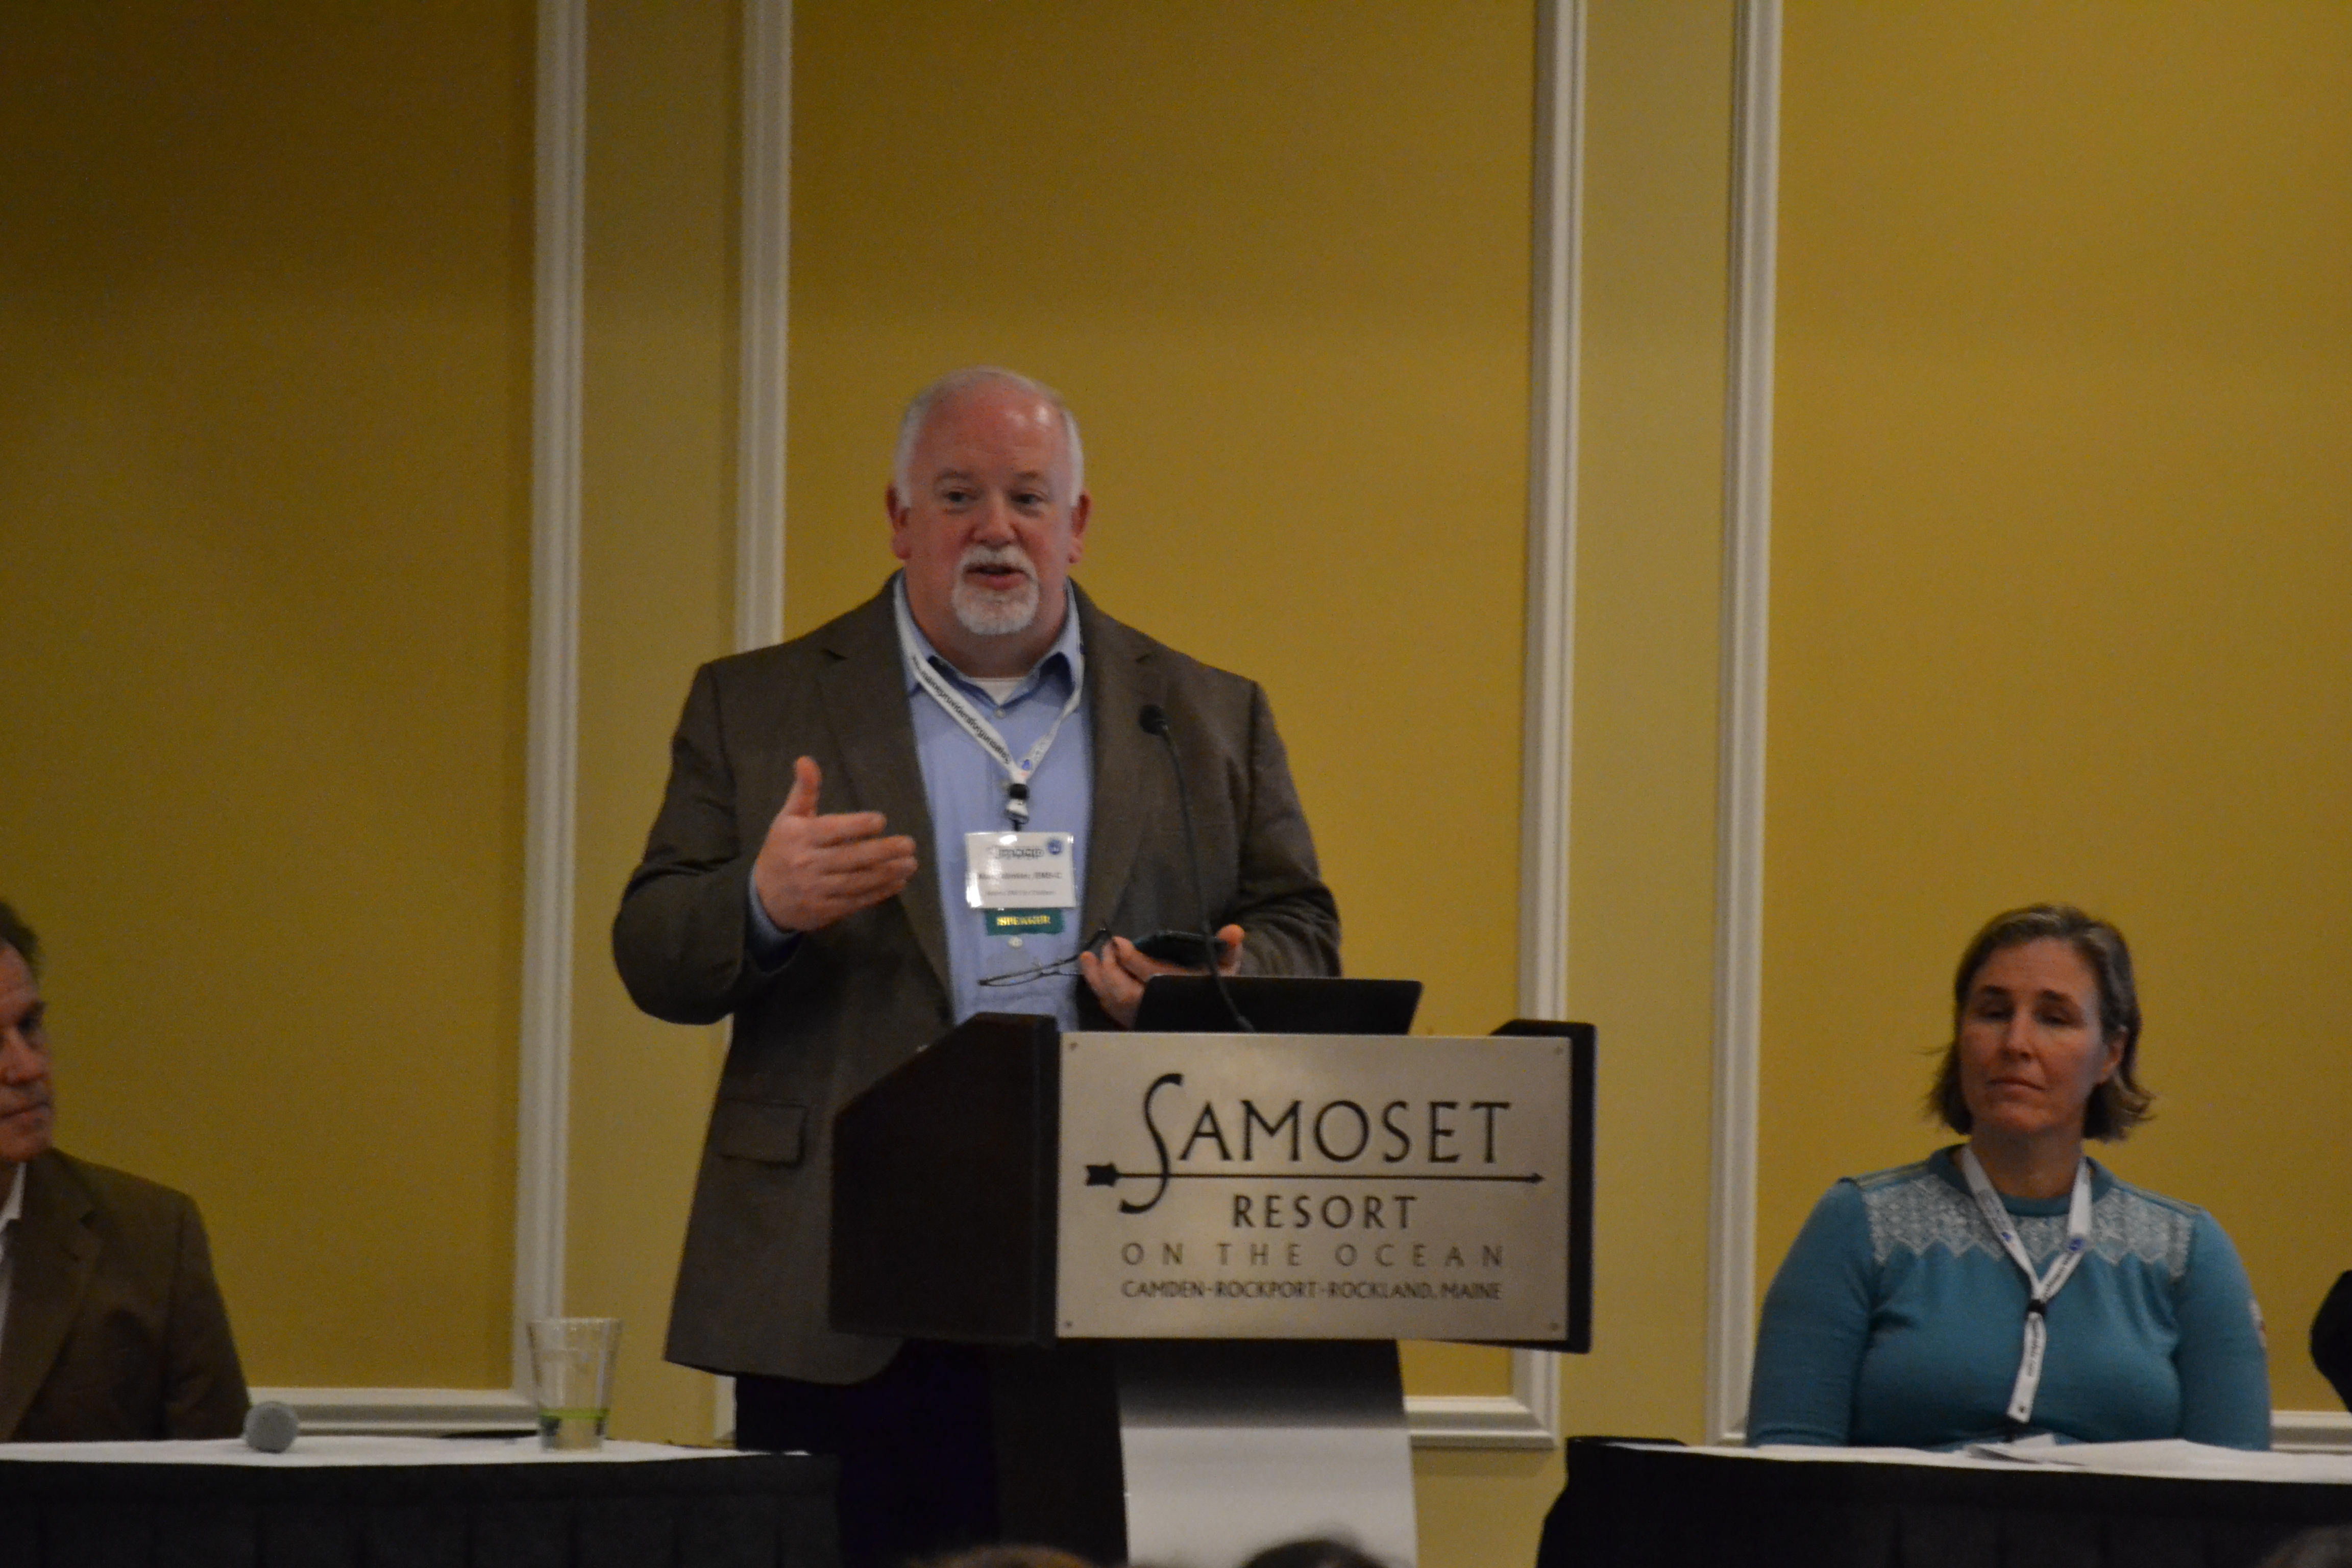 Marc Minkler, Maine EMS-C Introduces Keynote Dr. Auerbach and panel